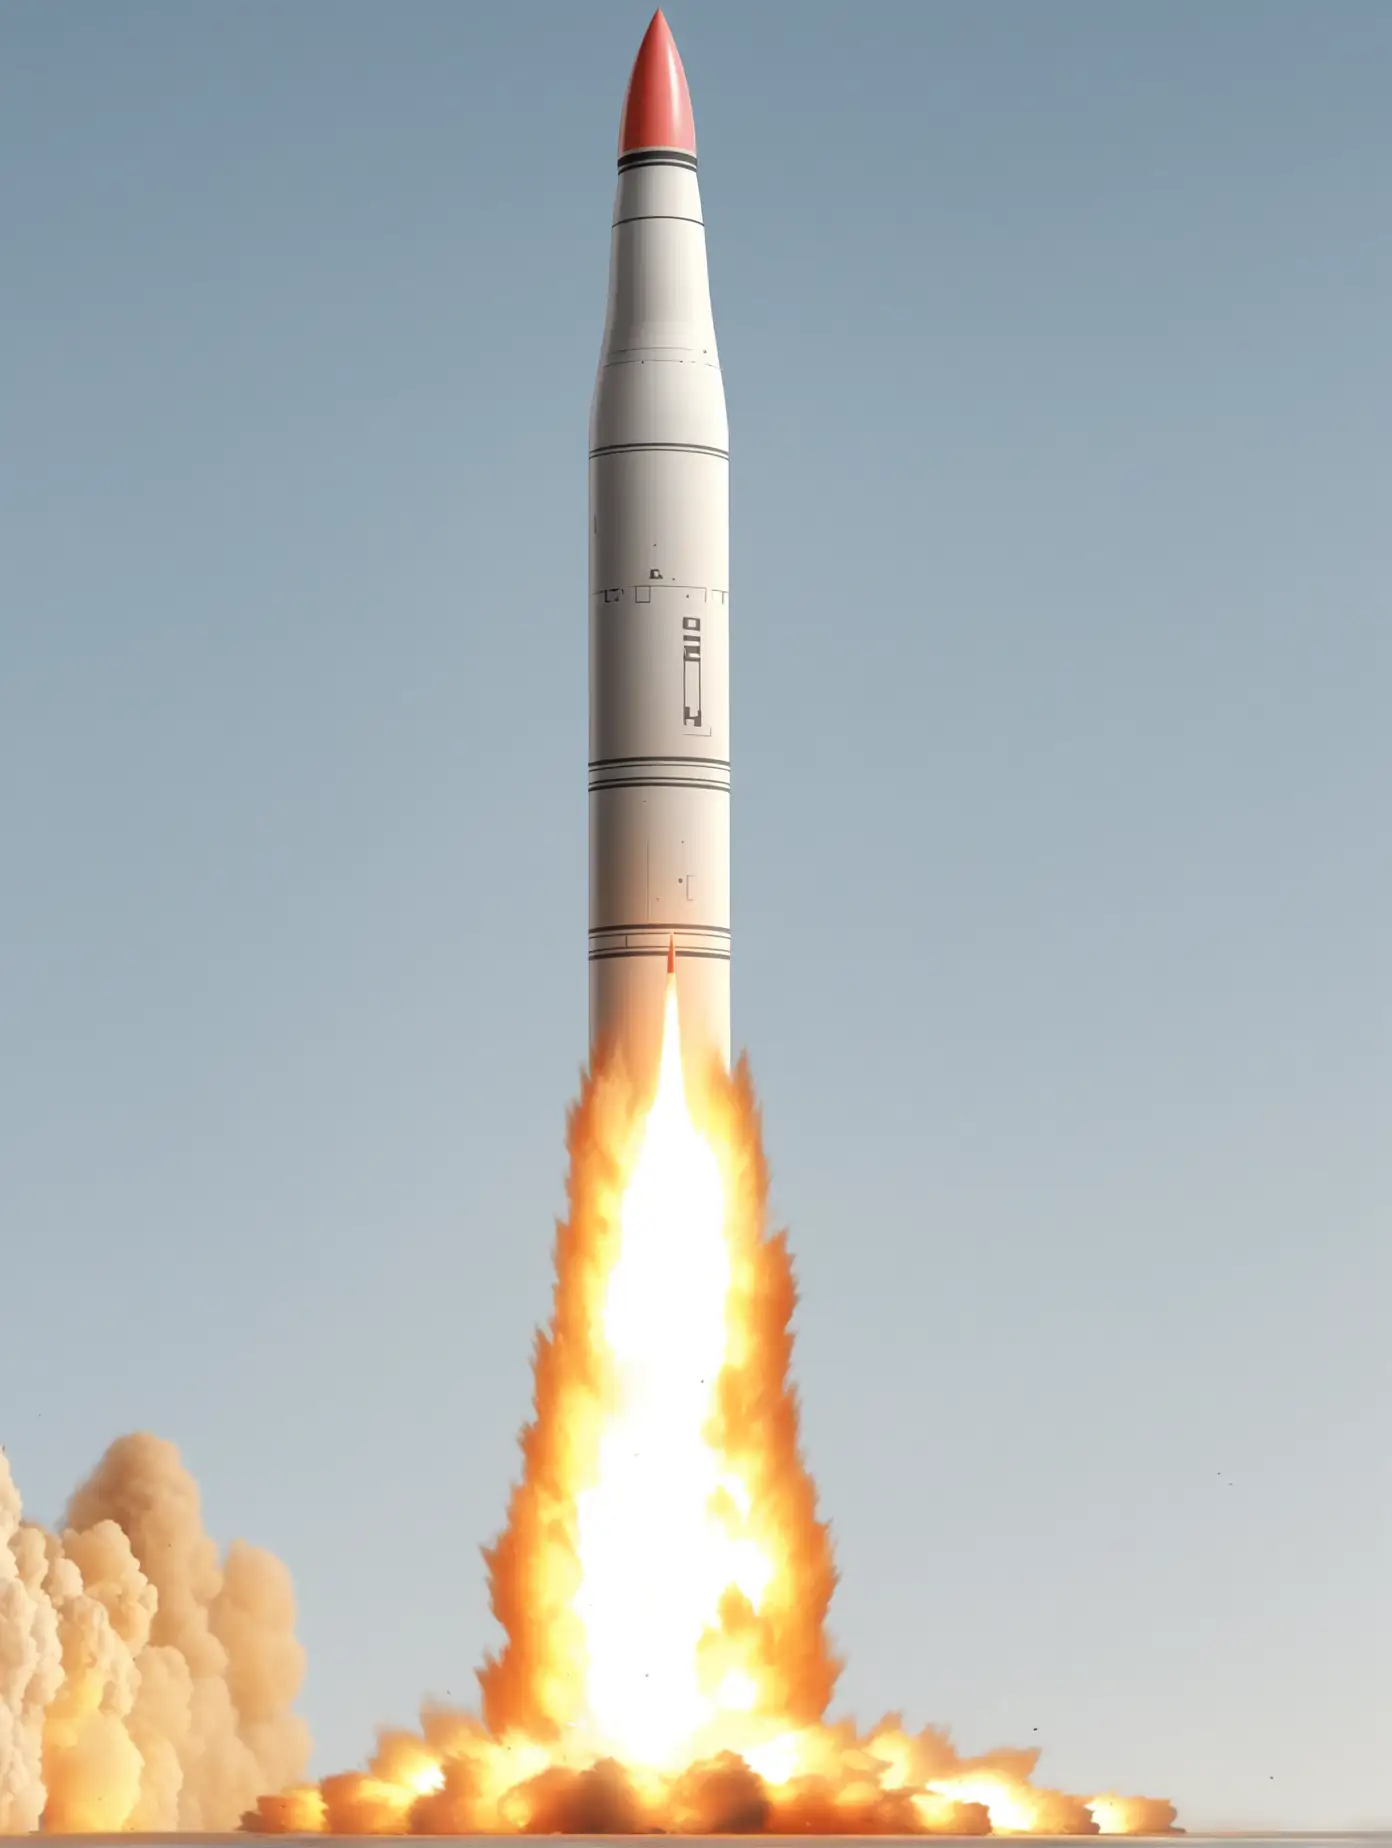 HighTech Ballistic Missile Launch on a Clear Day